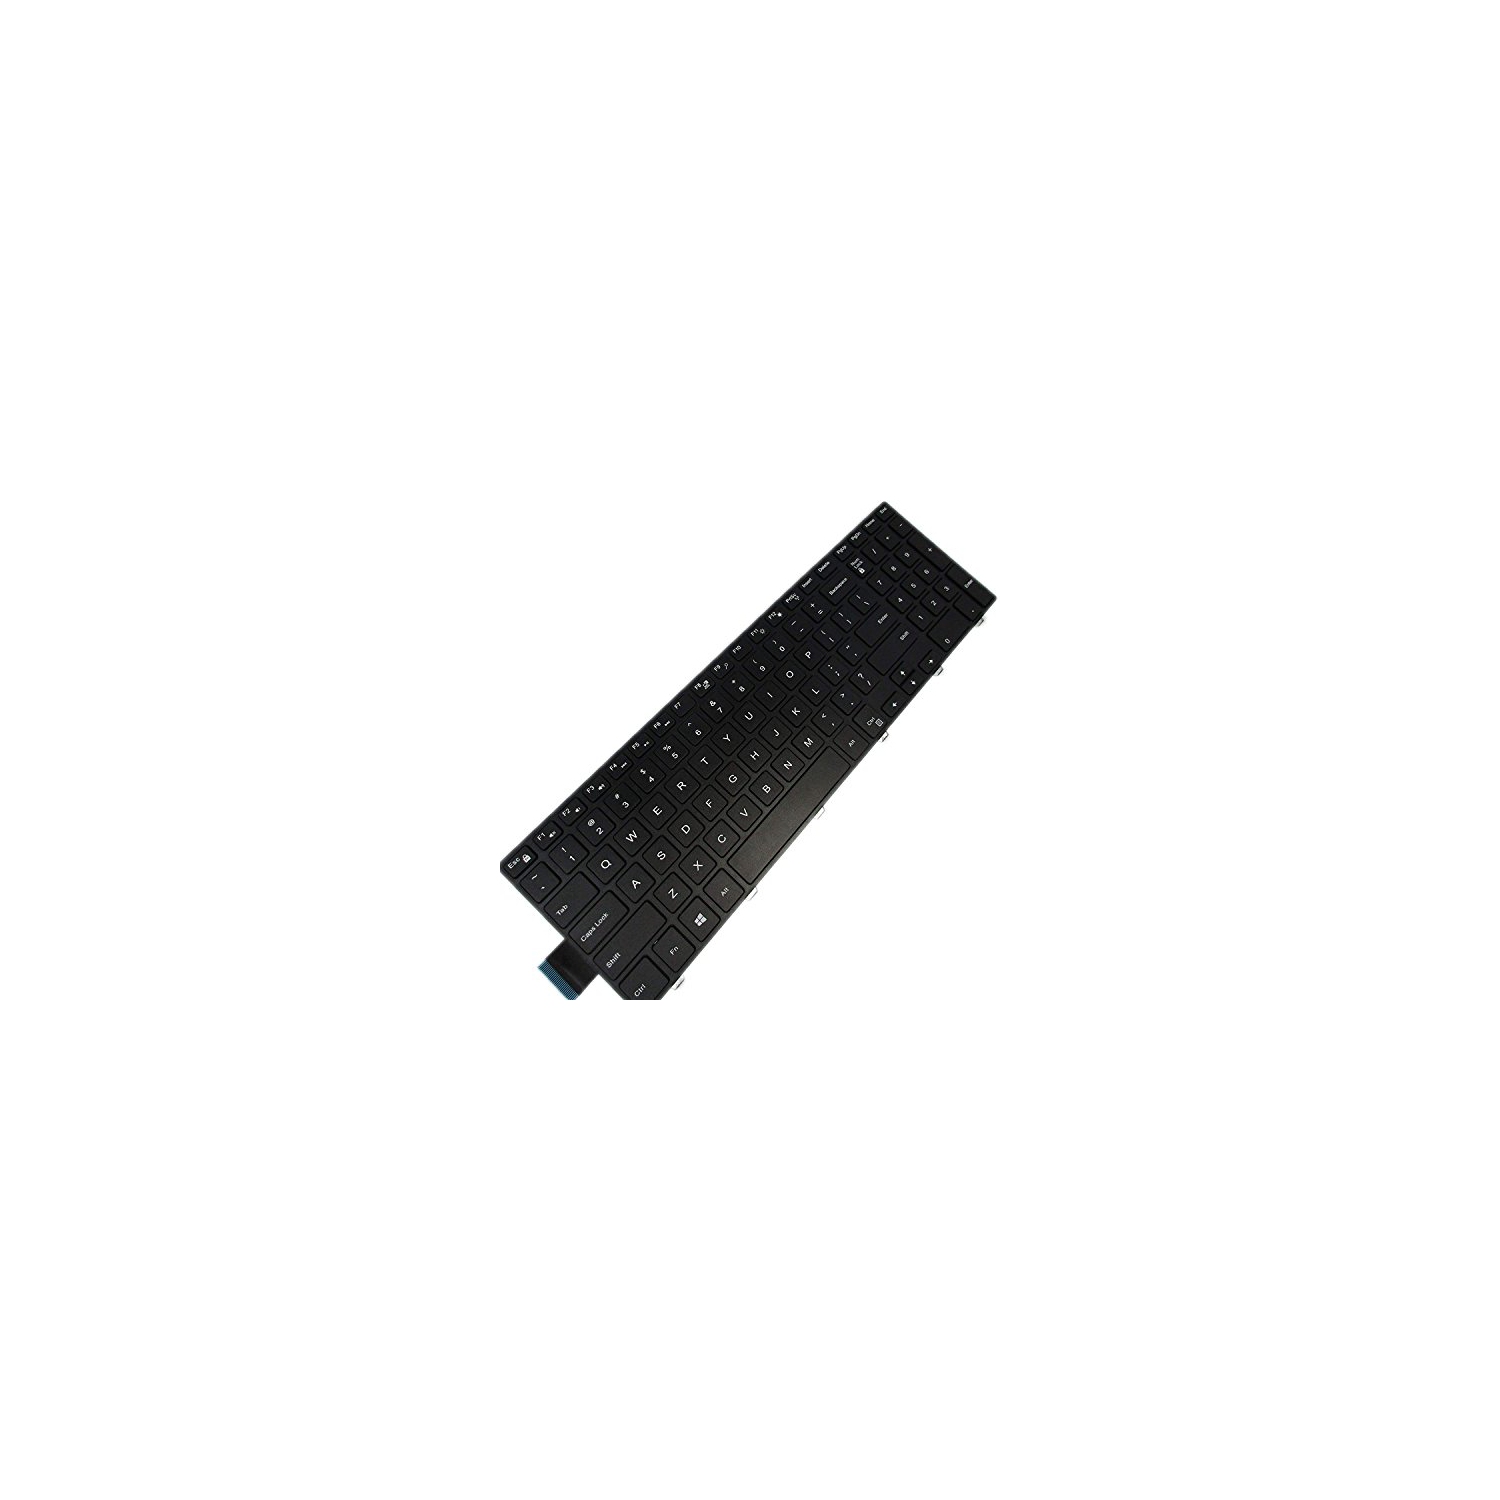 LaptopKing Replacement Keyboard for Dell Inspiron 15 3000 Series 3541 3542 3543 3551 3552 3553 3558 3559, 5000 Series 5542